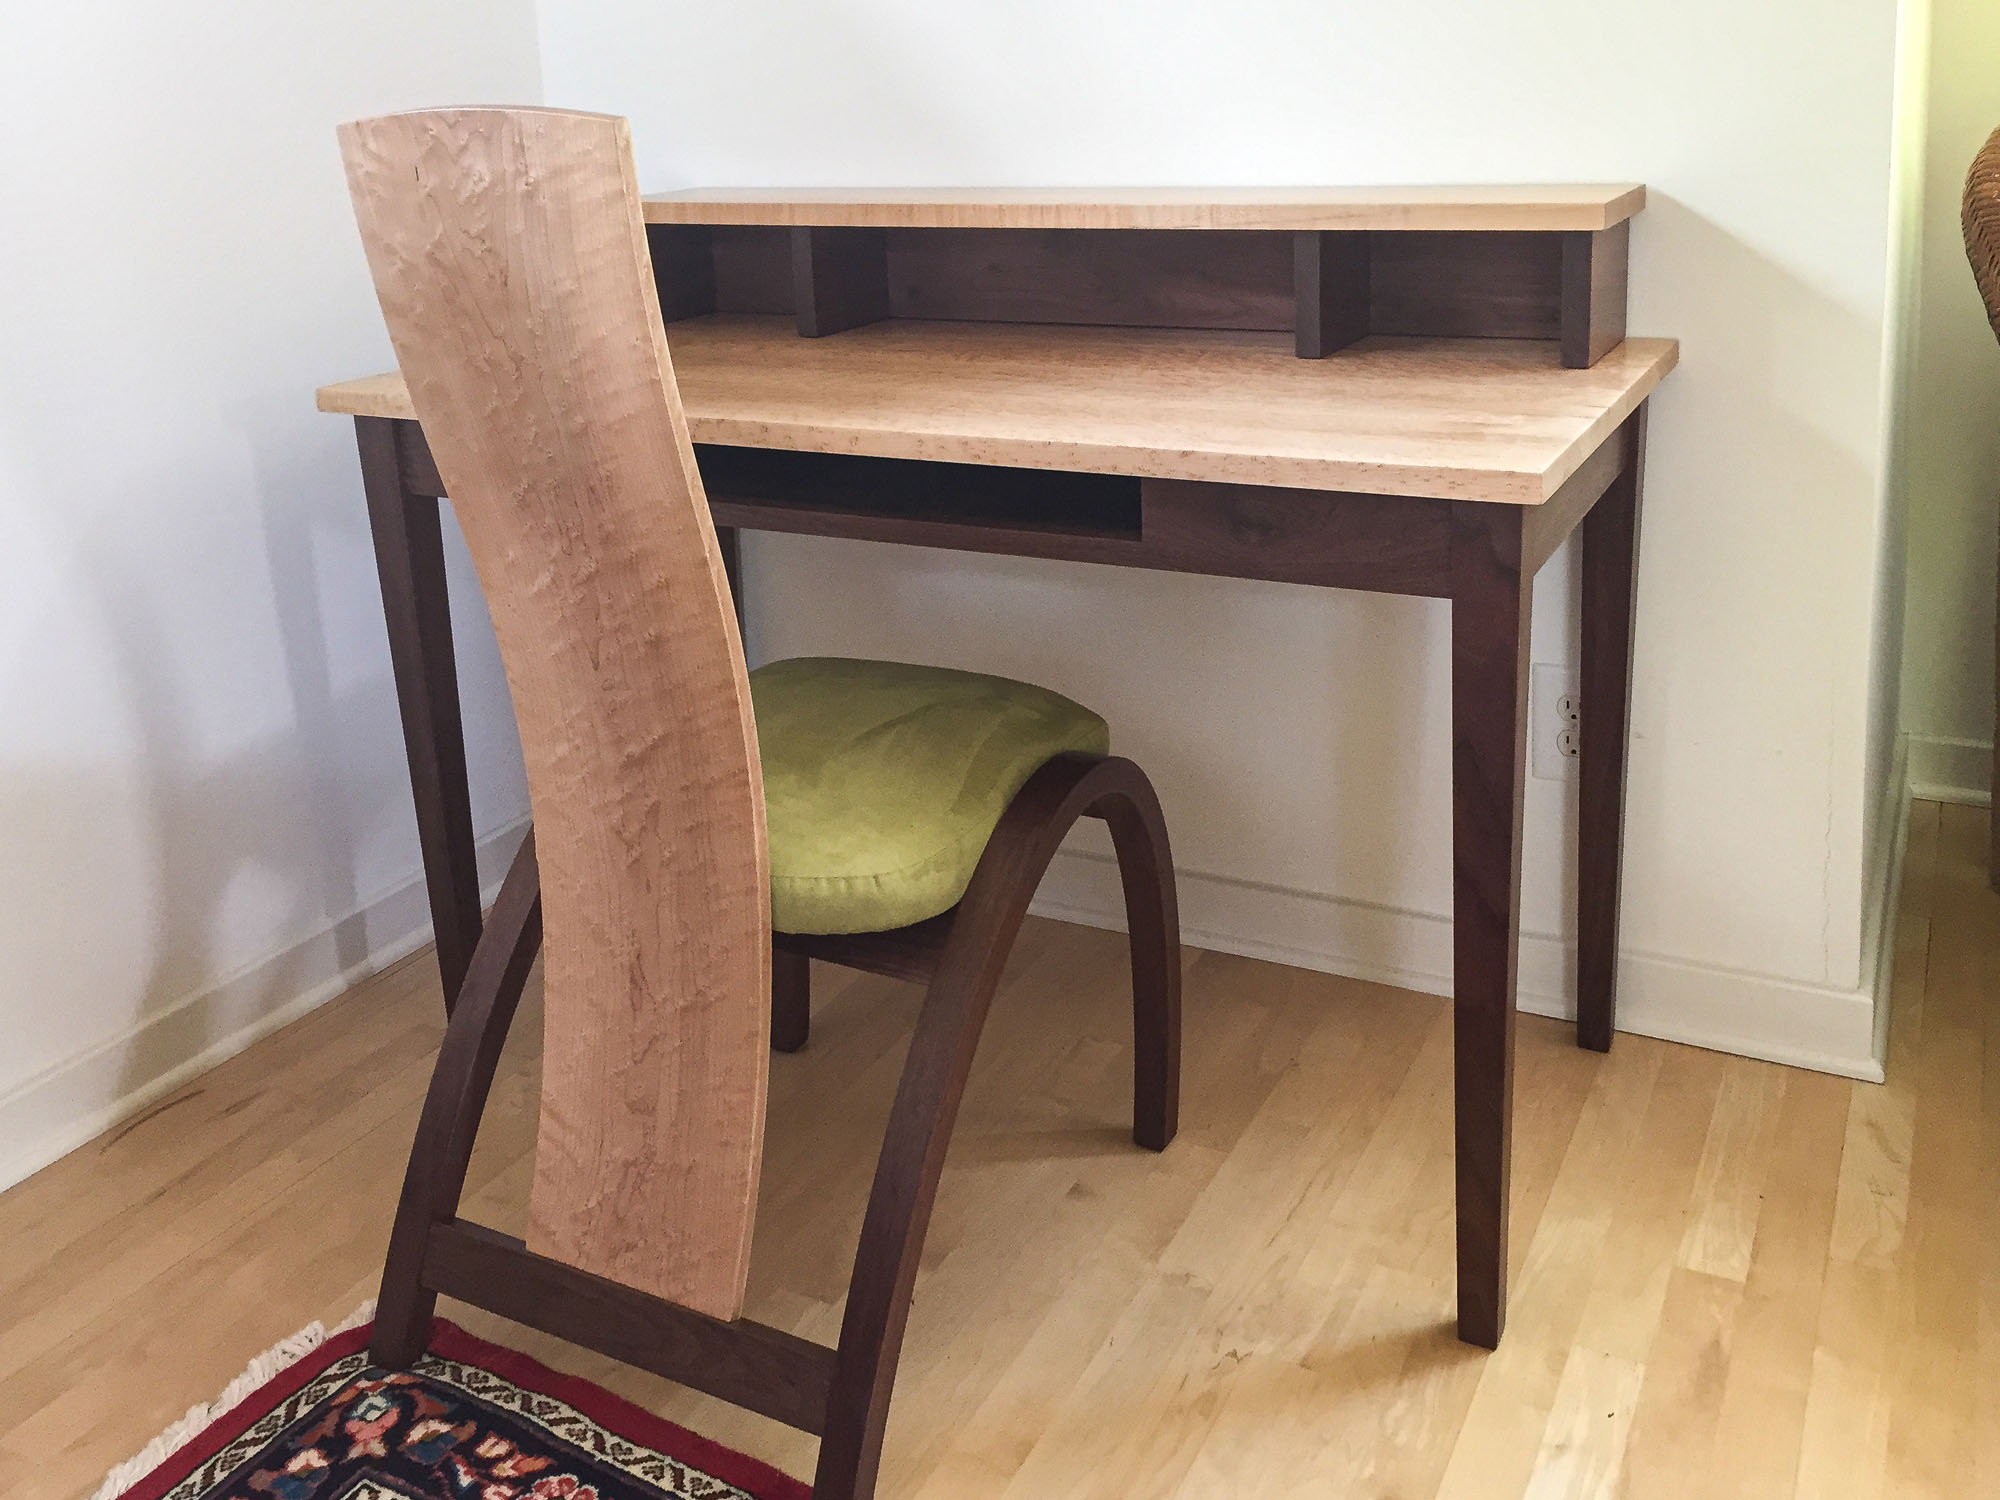 Custom Desk and Bentwood Chair